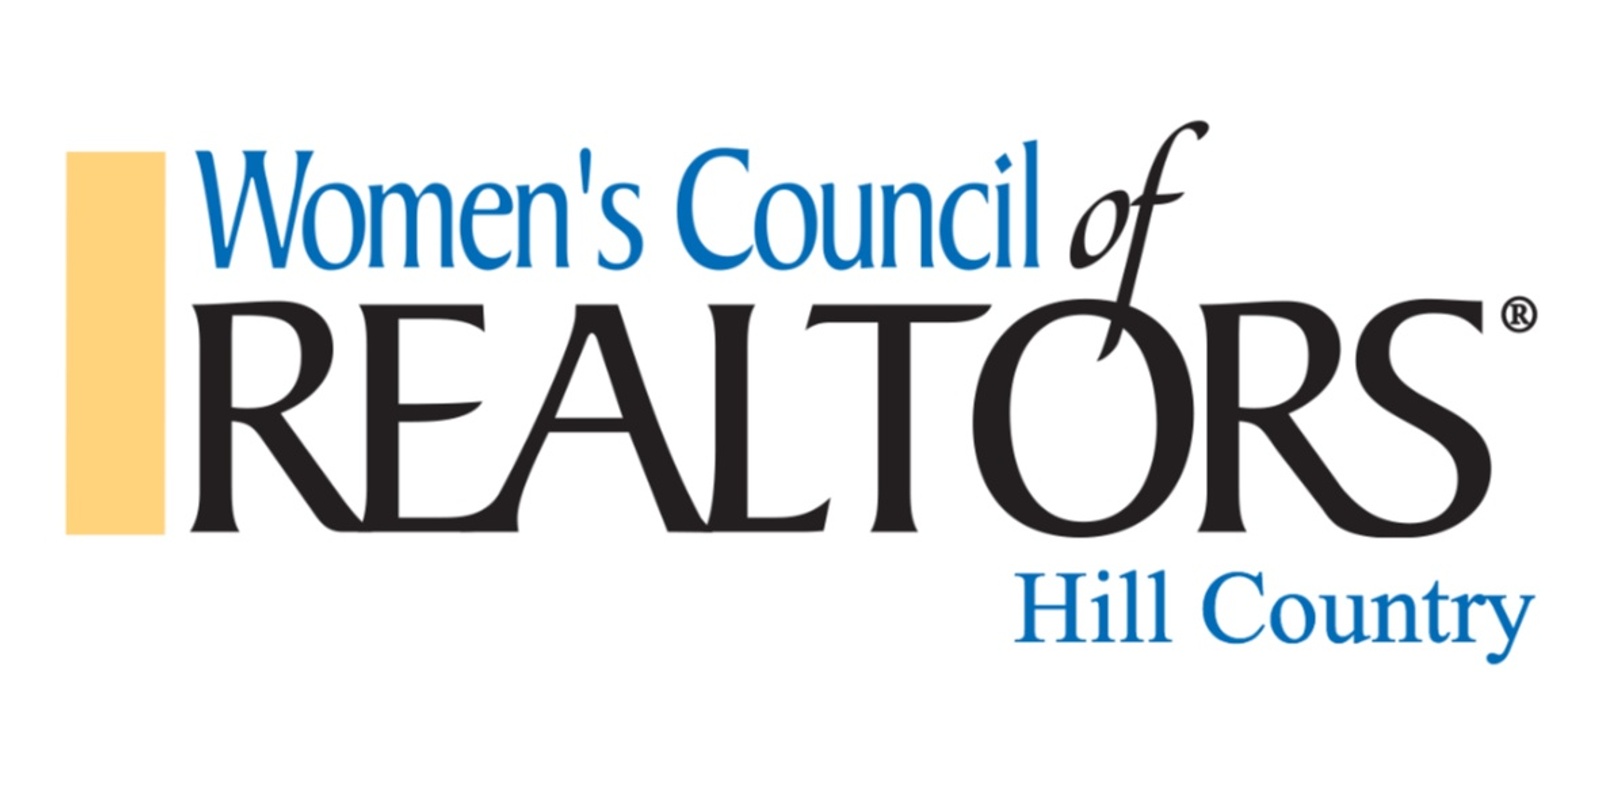 Women’s Council of REALTORS Hill Country's banner